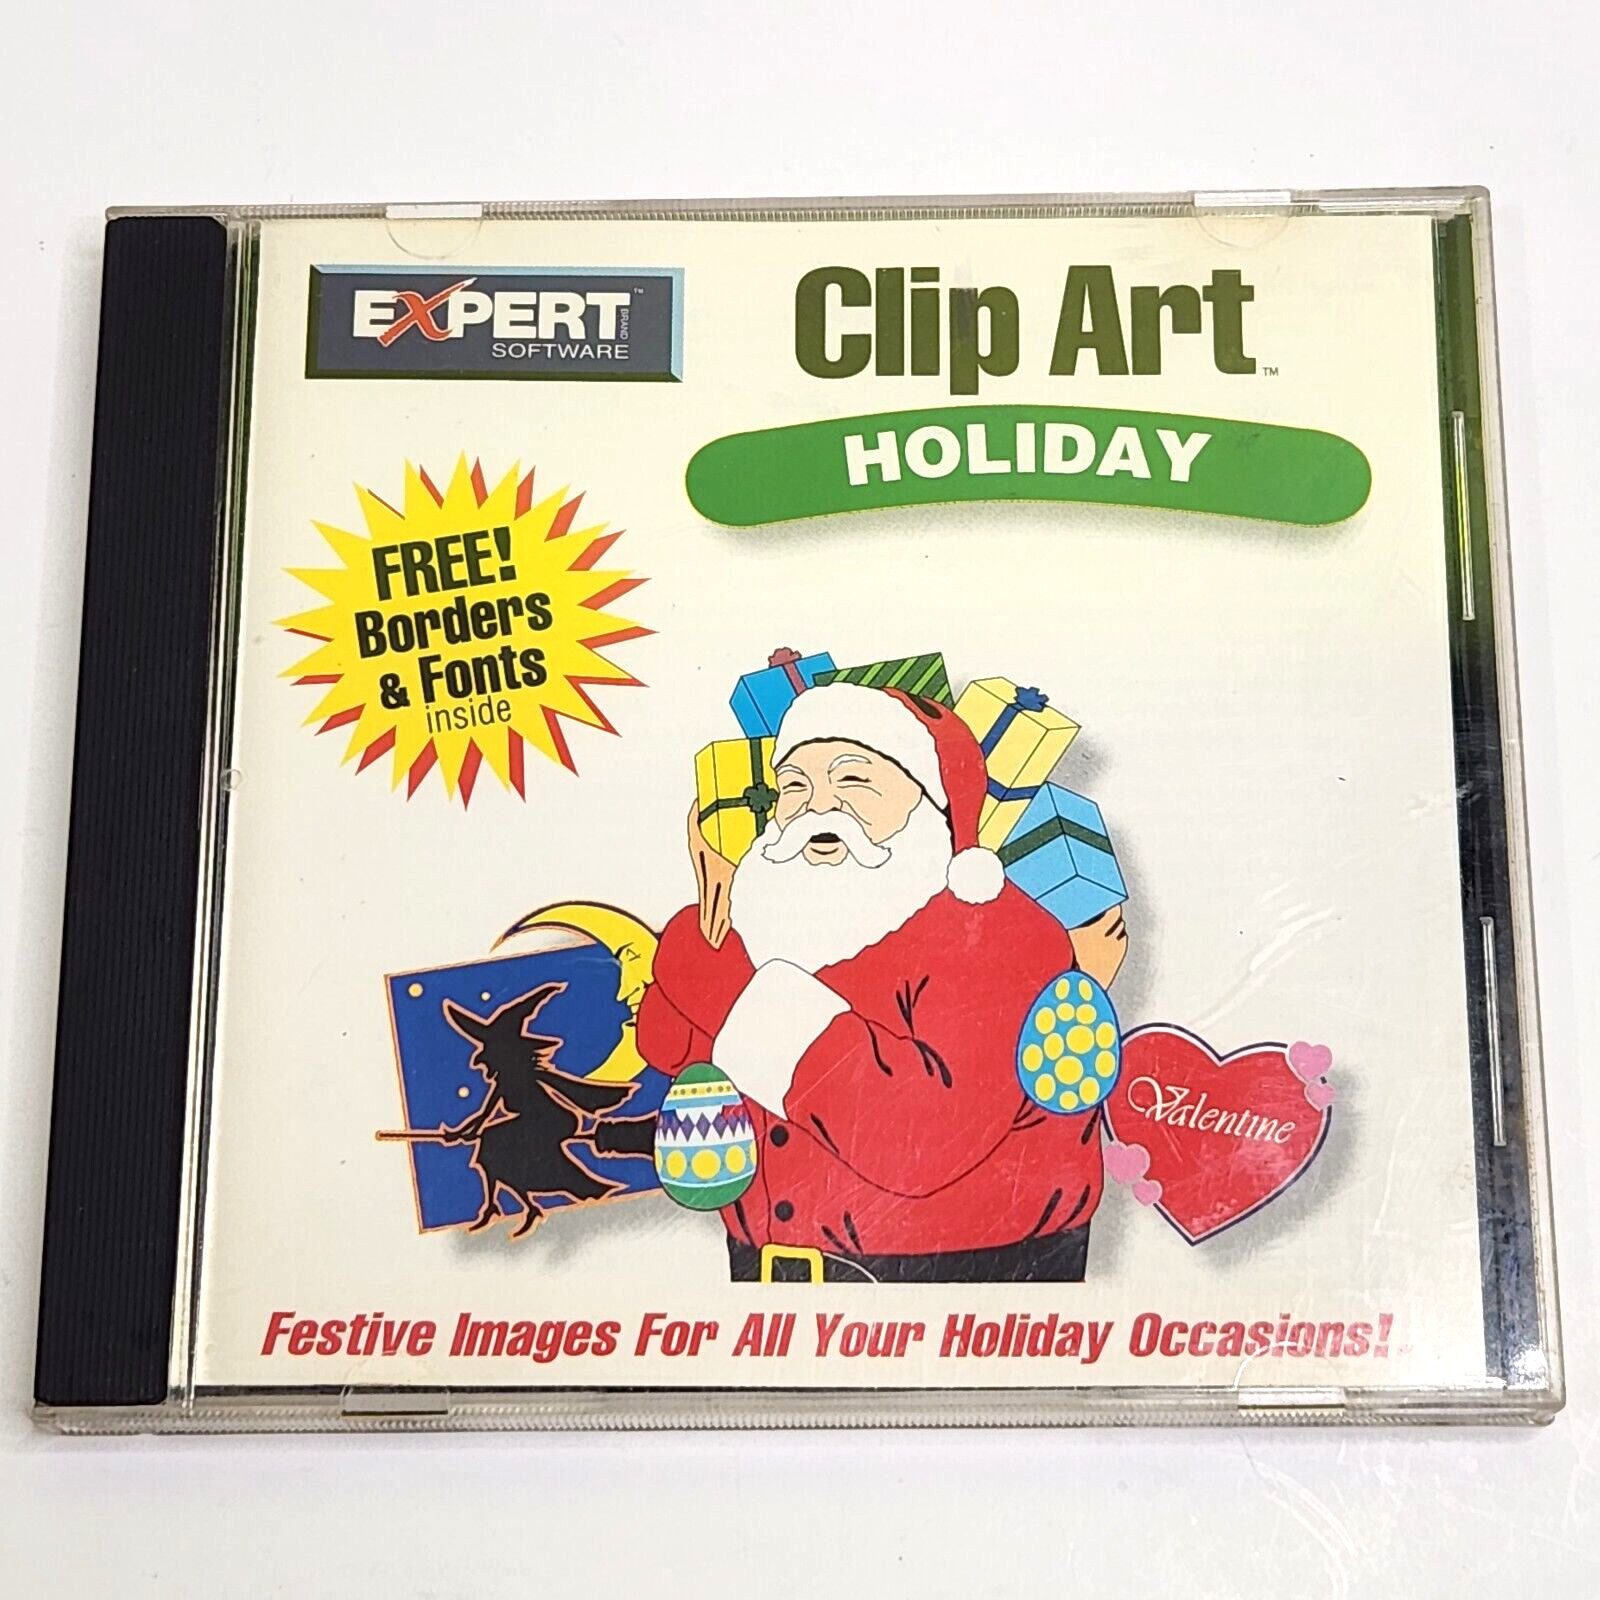 Vintage EXPERT SOFTWARE Valentines Holiday Clip Art CD ROM for Windows Mac